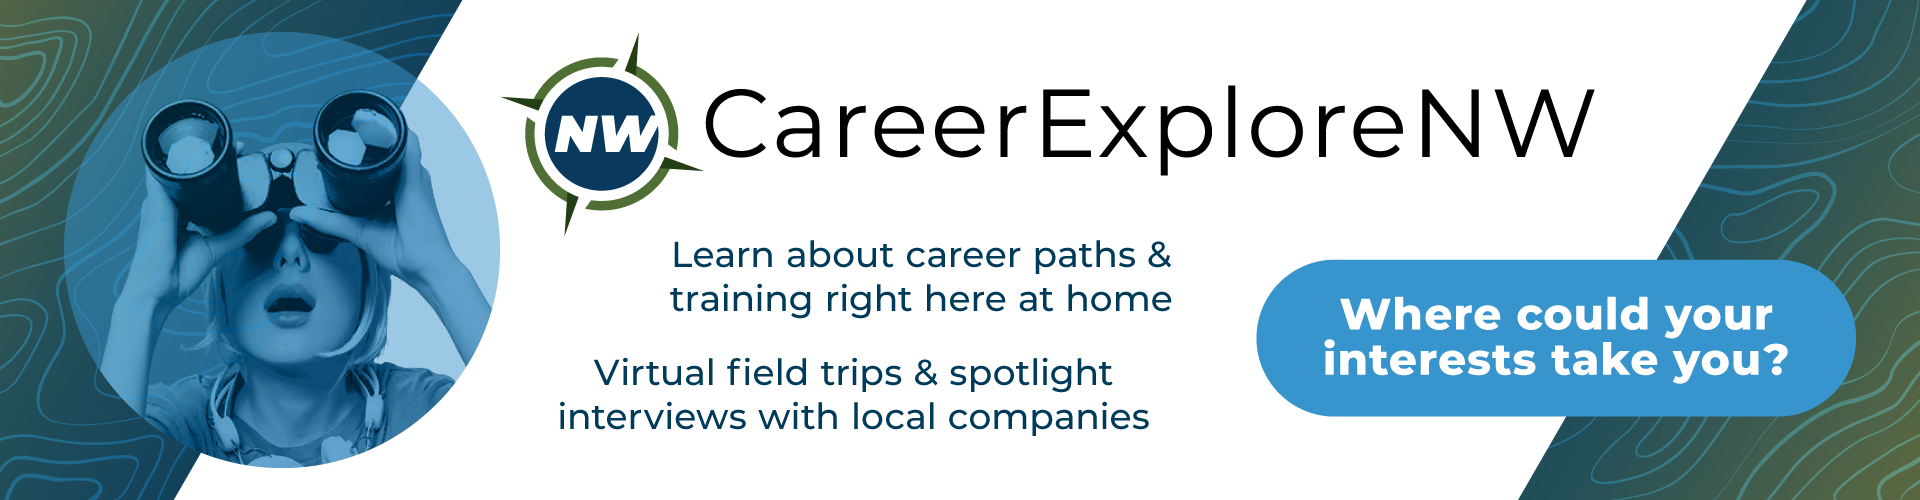 Career Explore NW - Learn about career paths & training right here at home. Virtual field trips & spotlight interviews with local companies.